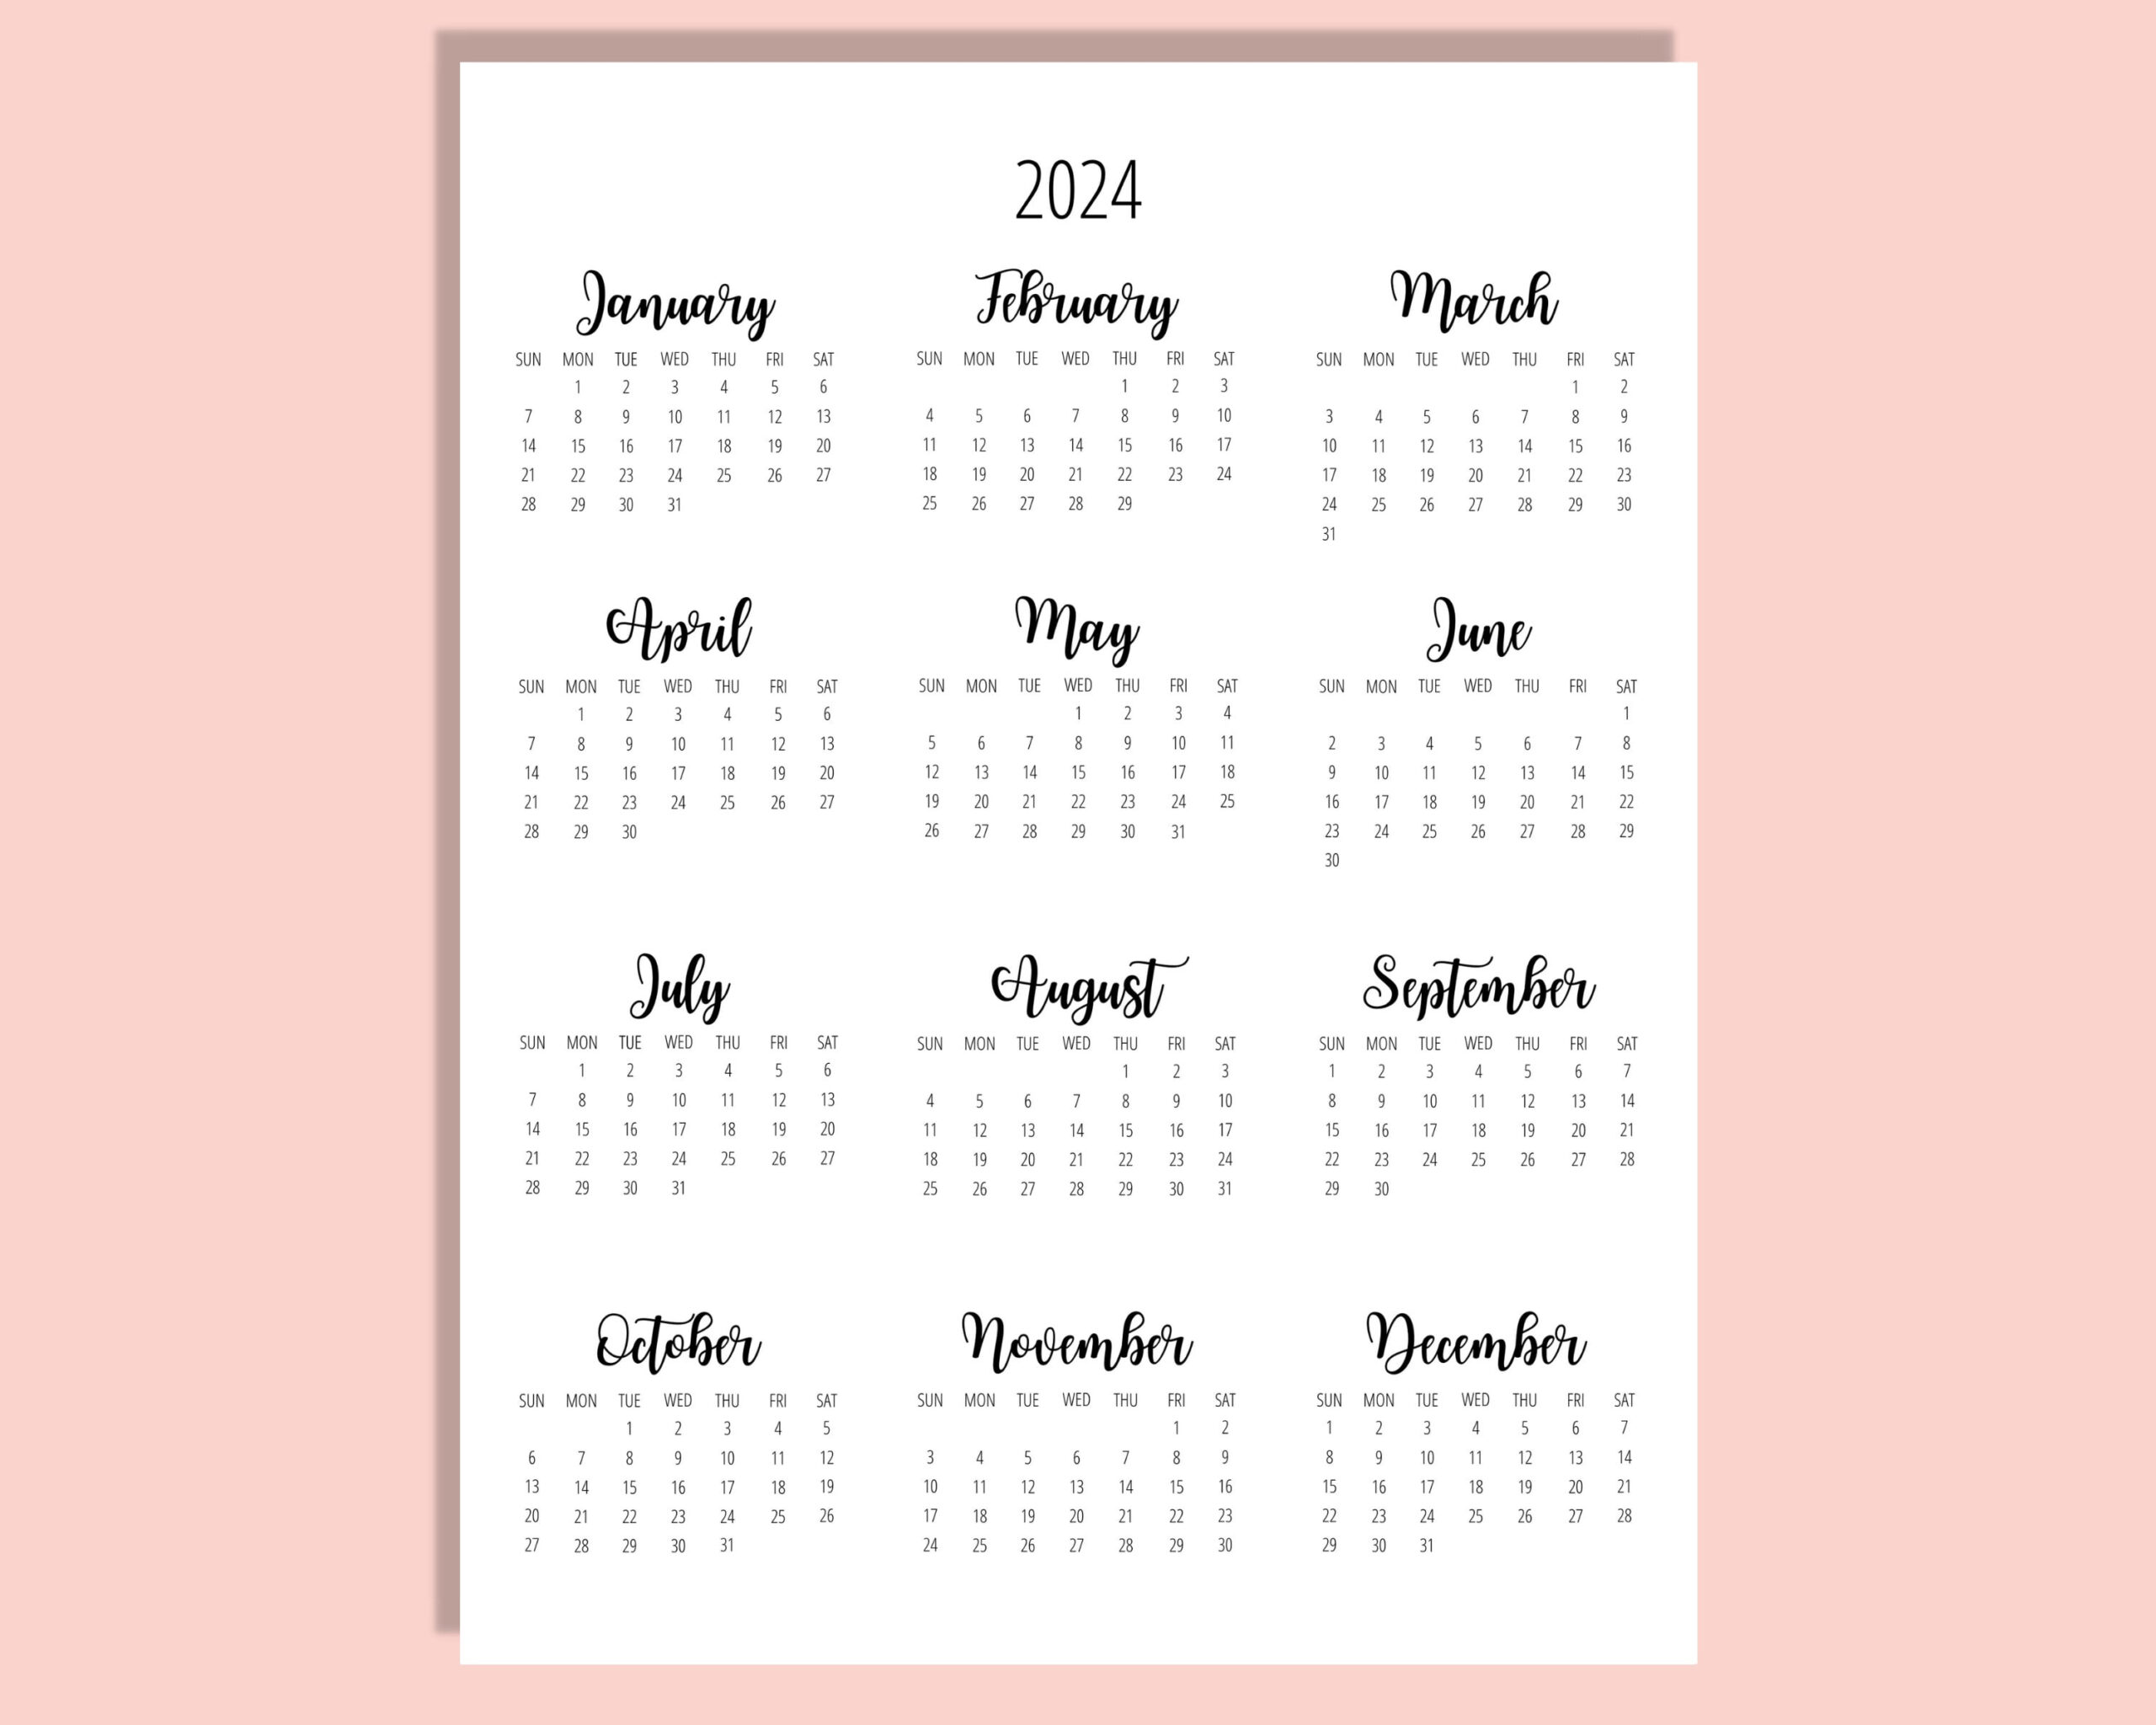 2024 Calendar Template 8.5 X 11 Inches Vertical Year At A - Etsy for 8.5 X 11 Calendar 2024 Printable